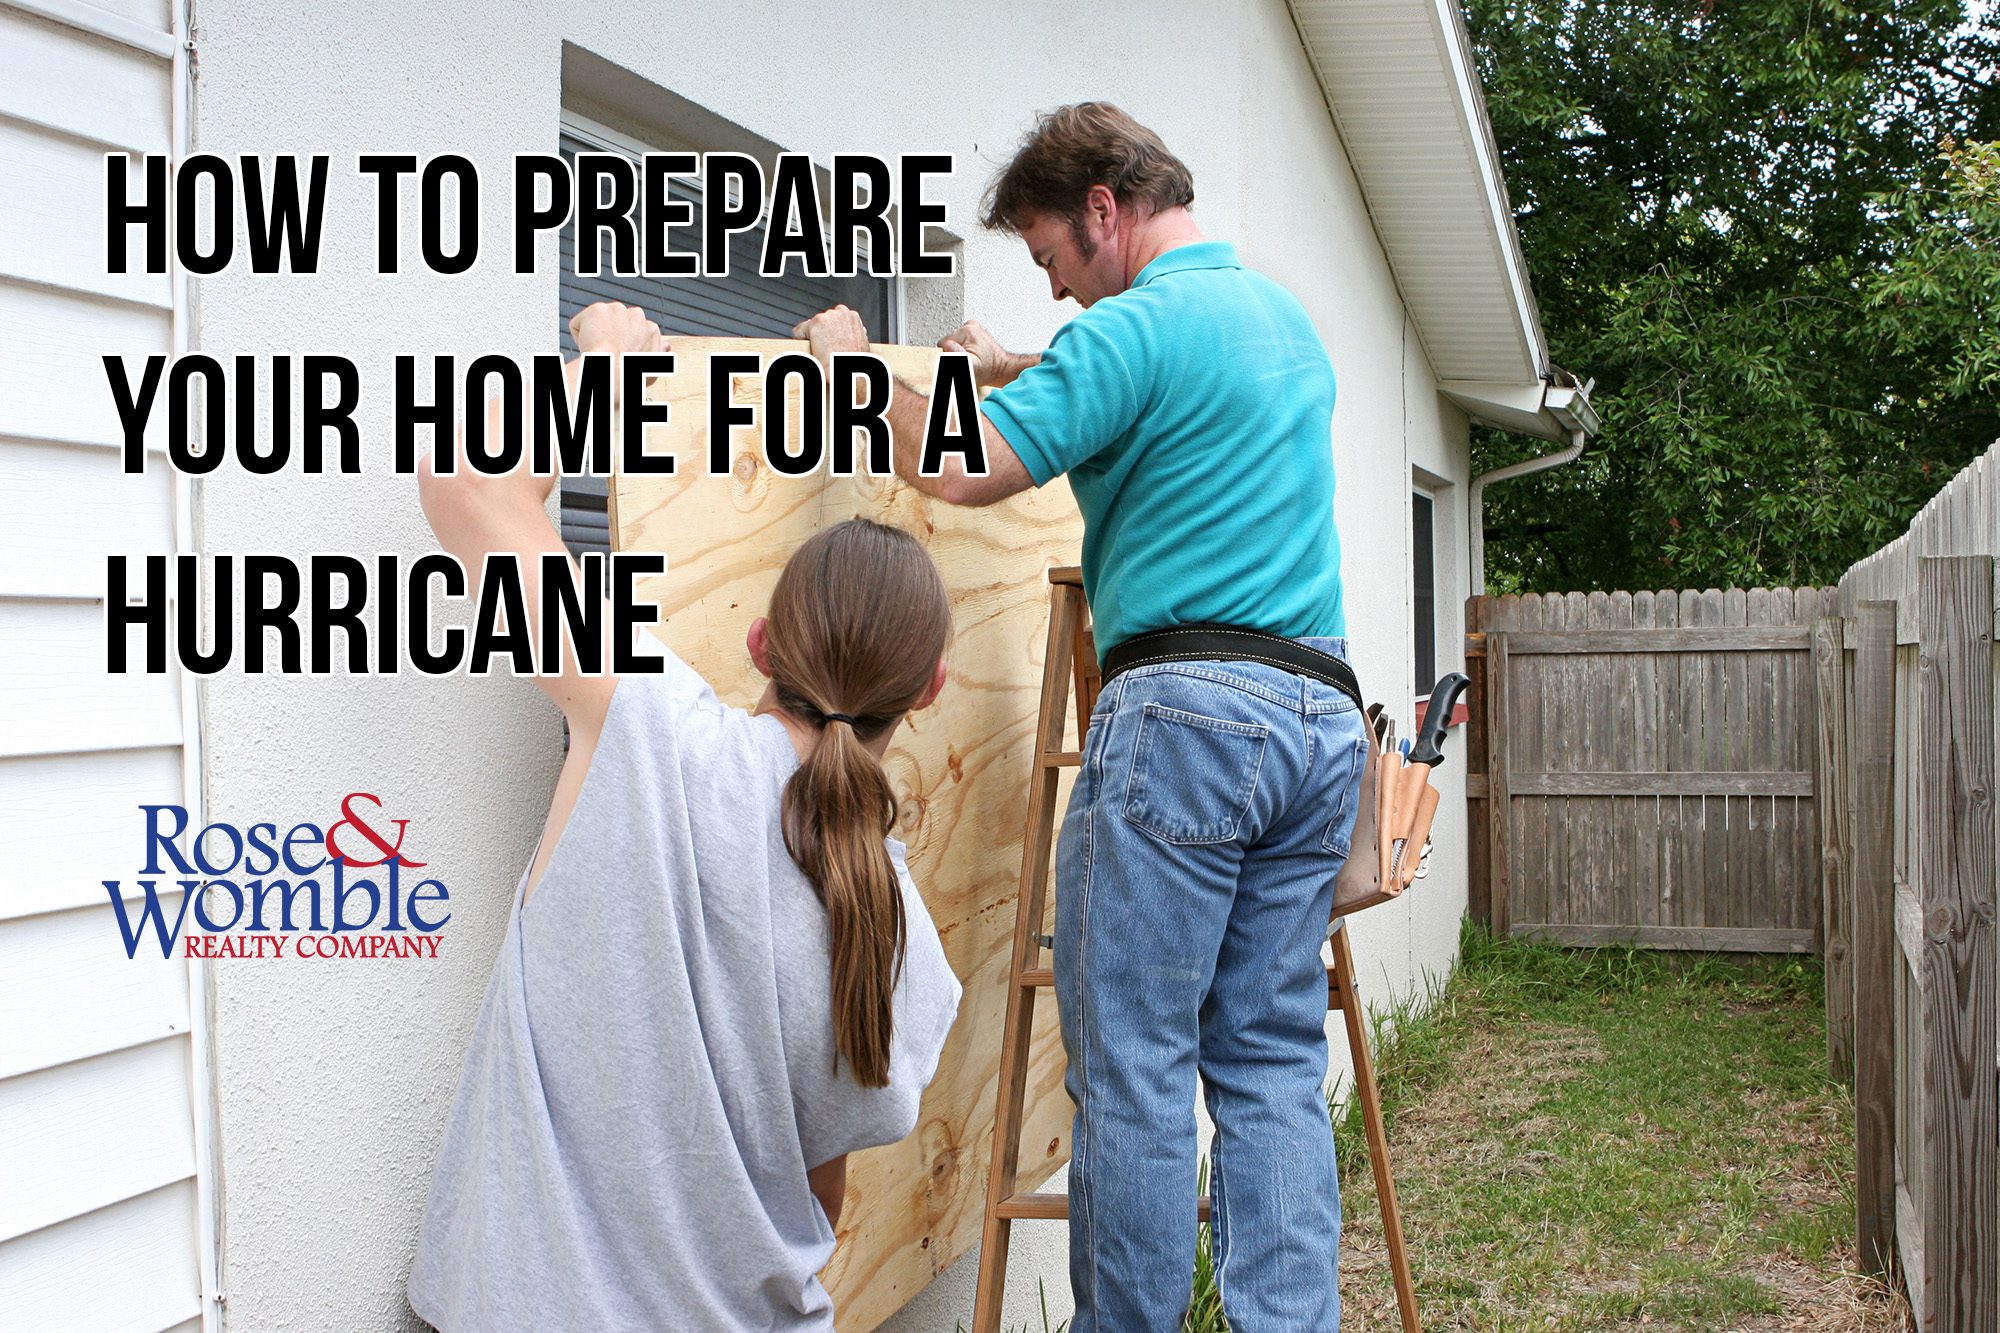 How to Prepare your Home for a Hurricane - Rose & Womble Realty Co.